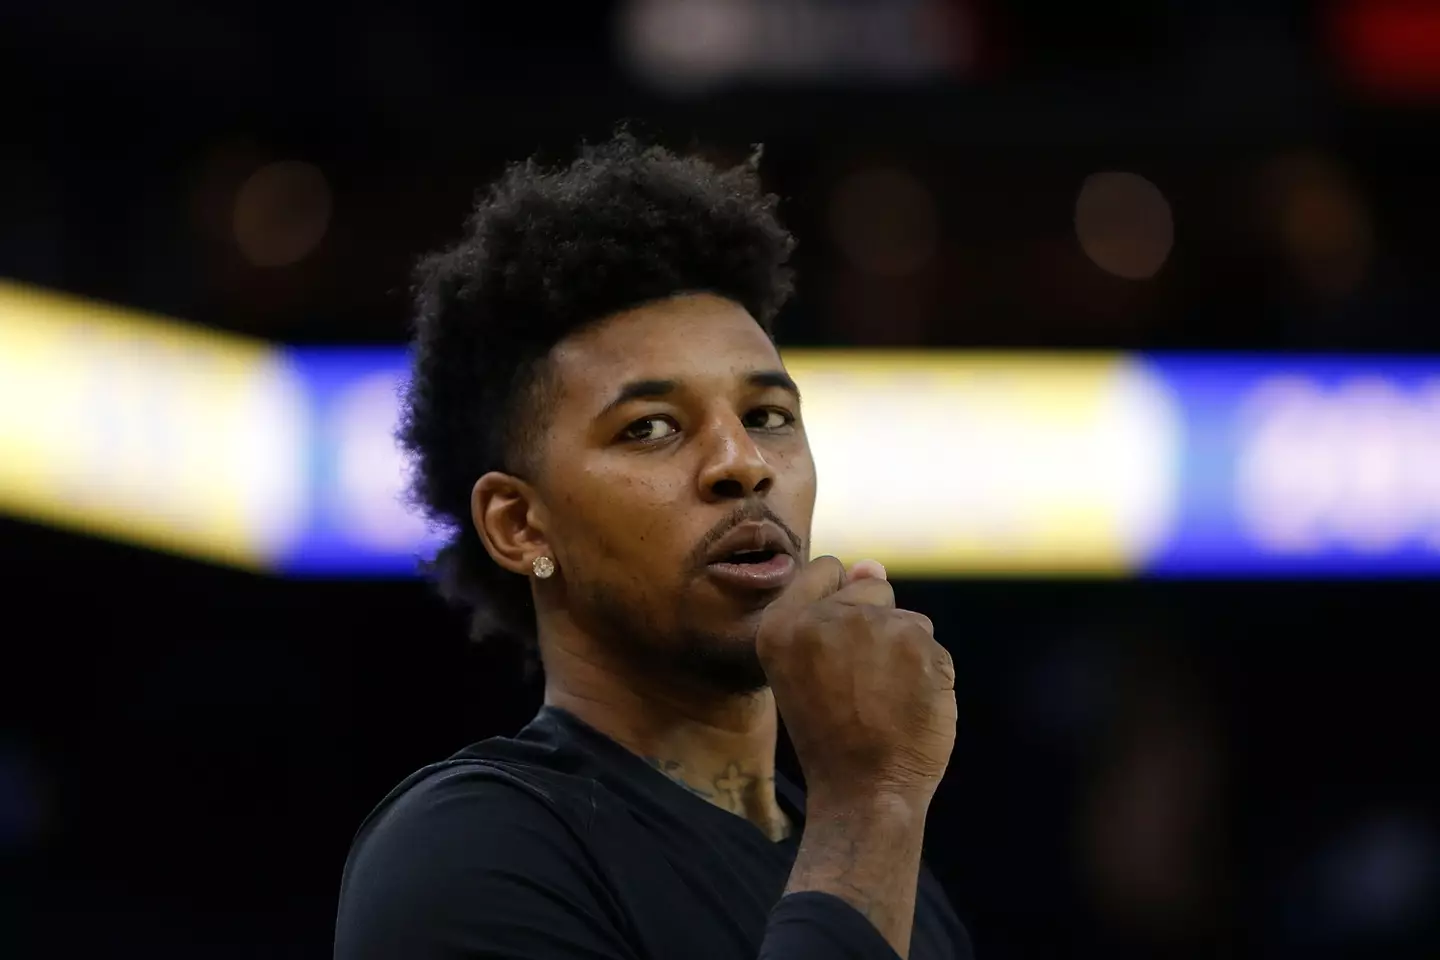 Nick Young may be a NBA star but he's best known for being the face of an iconic meme.